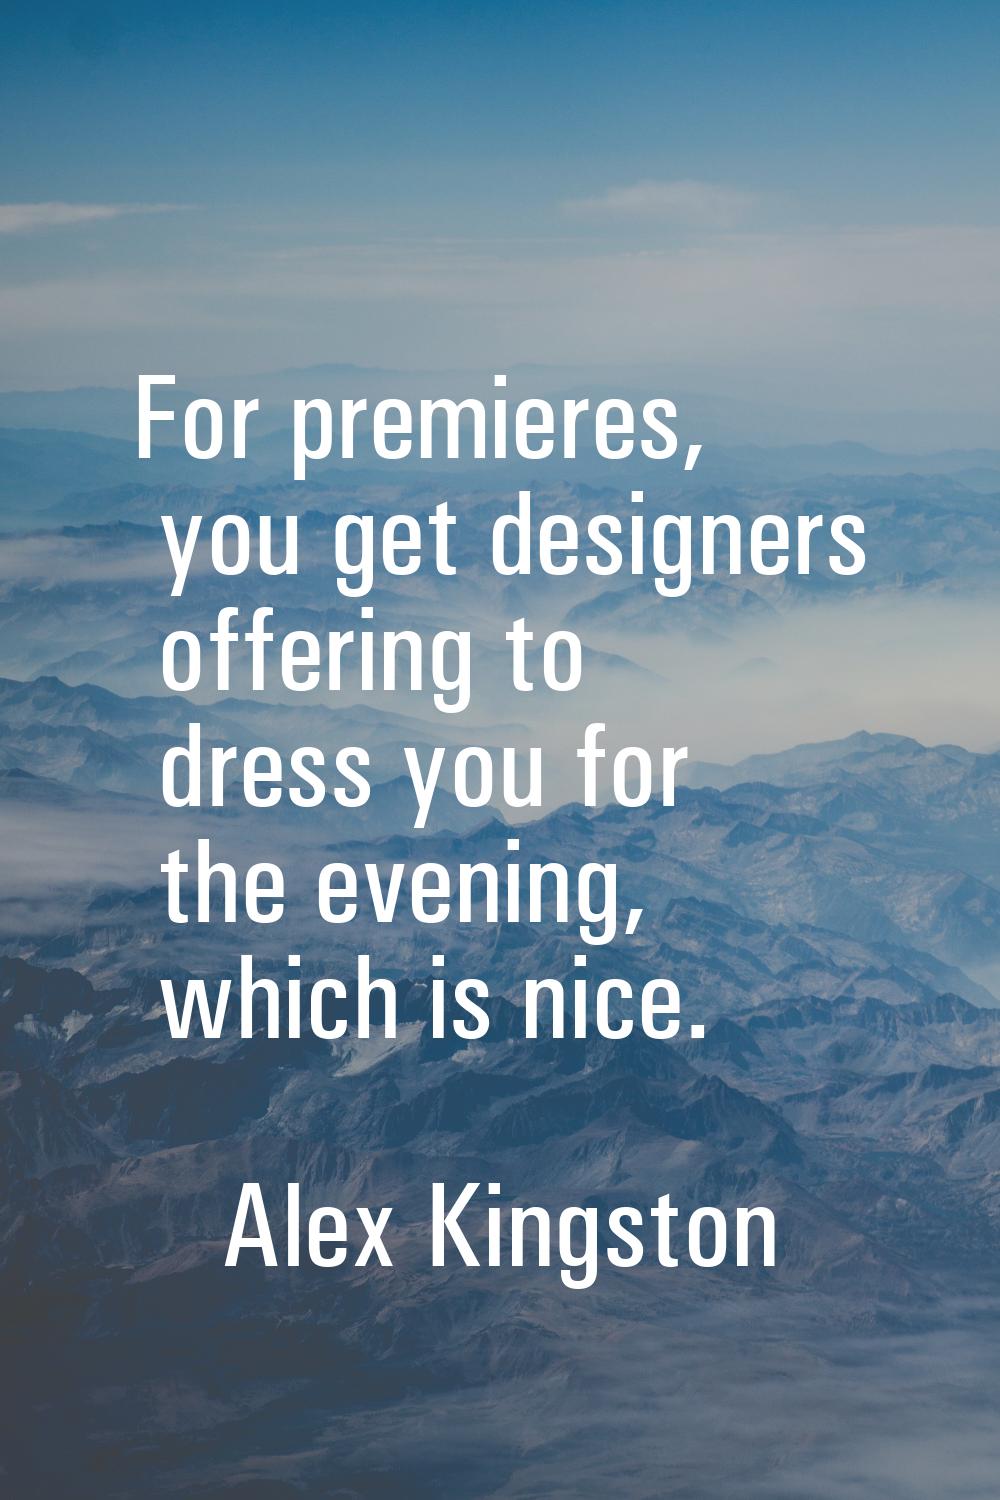 For premieres, you get designers offering to dress you for the evening, which is nice.